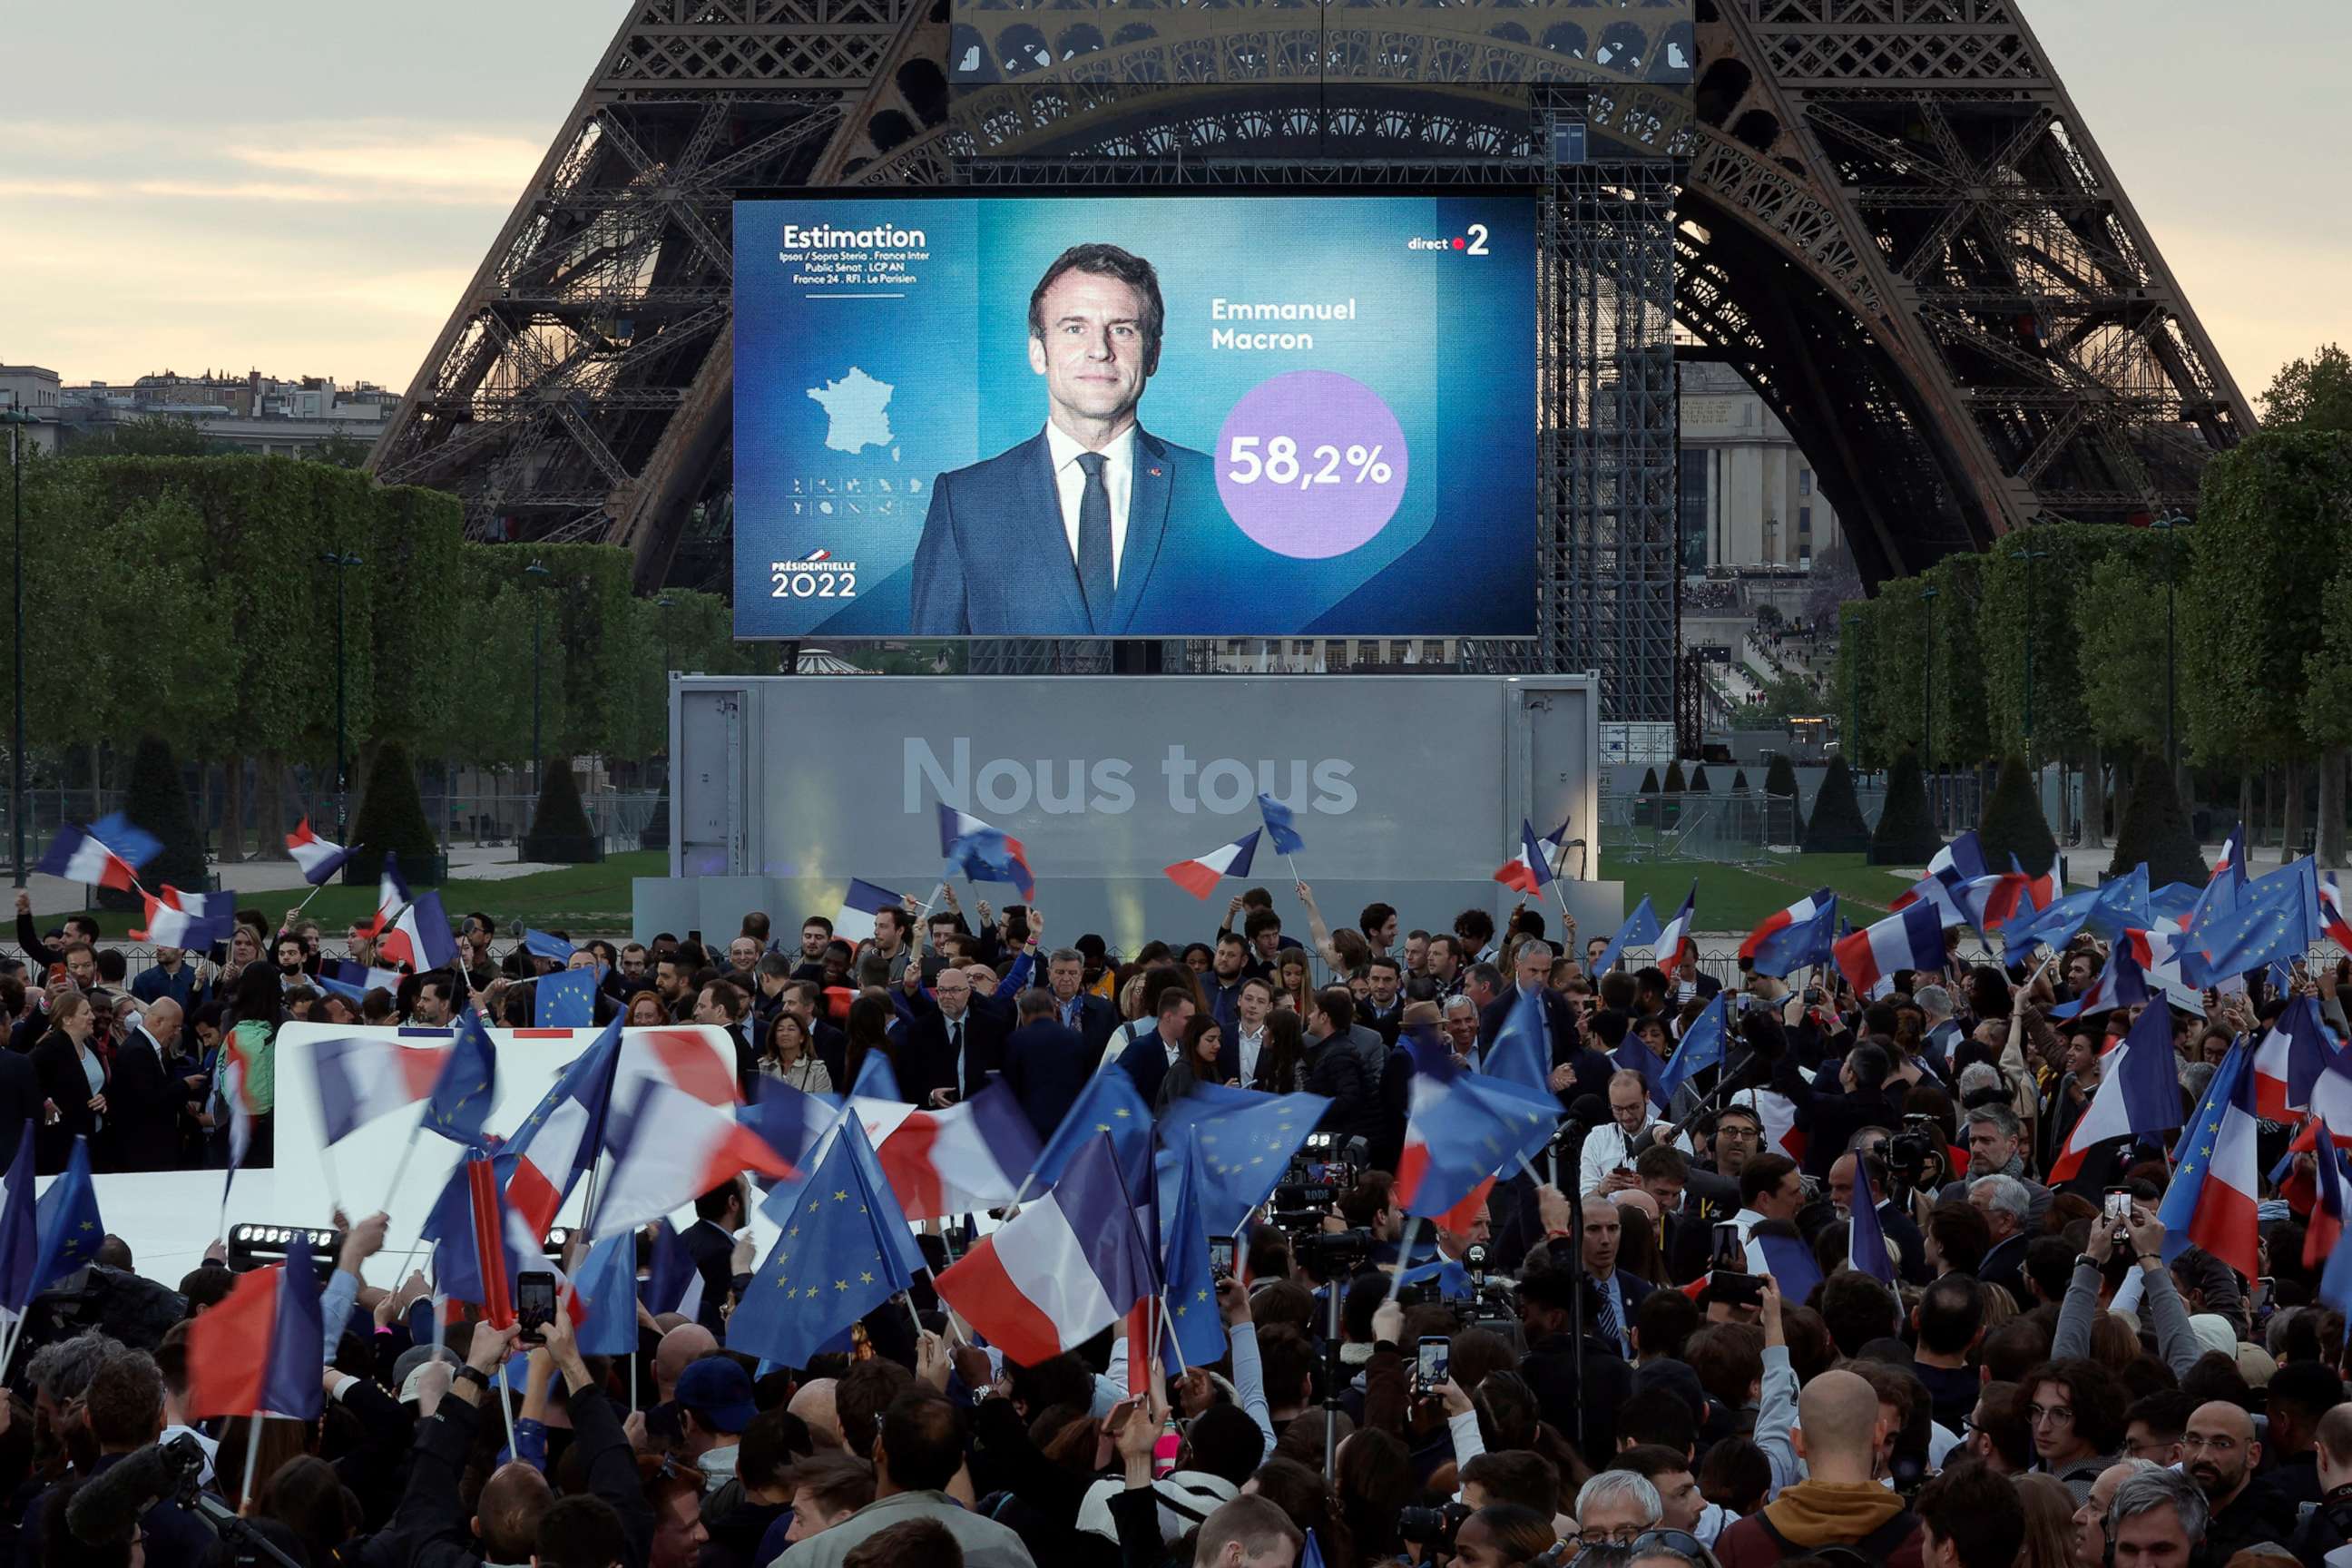 PHOTO: Supporters of French President Emmanuel Macron,  candidate for his re-election,  react after results were announced in the vote of the 2022 French presidential election, near Eiffel Tower, at the Champs de Mars in Paris,  April 24, 2022.